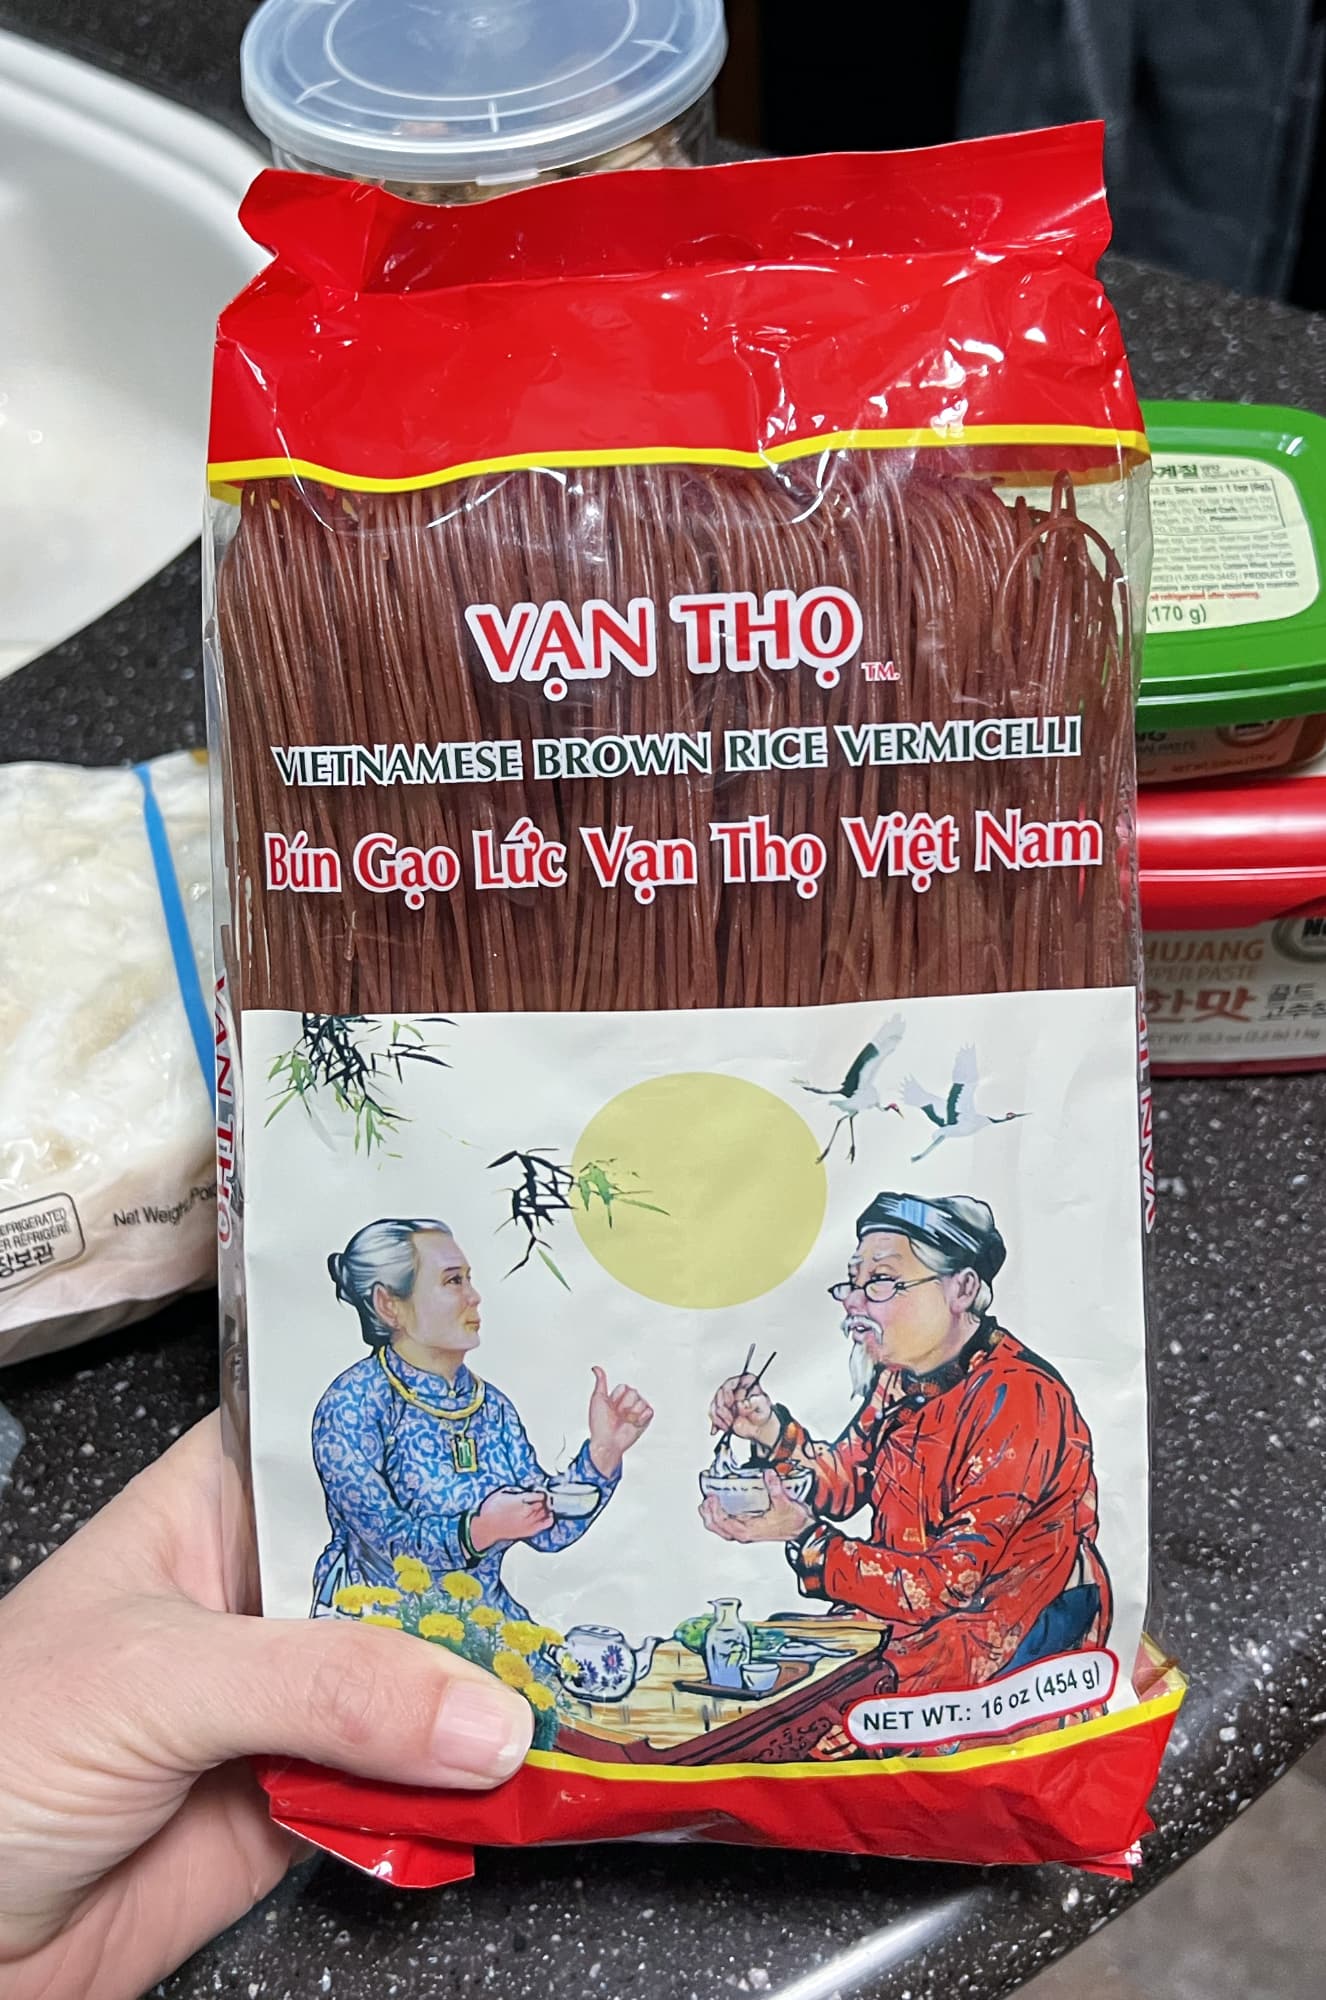 a package of brown rice vermicelli.